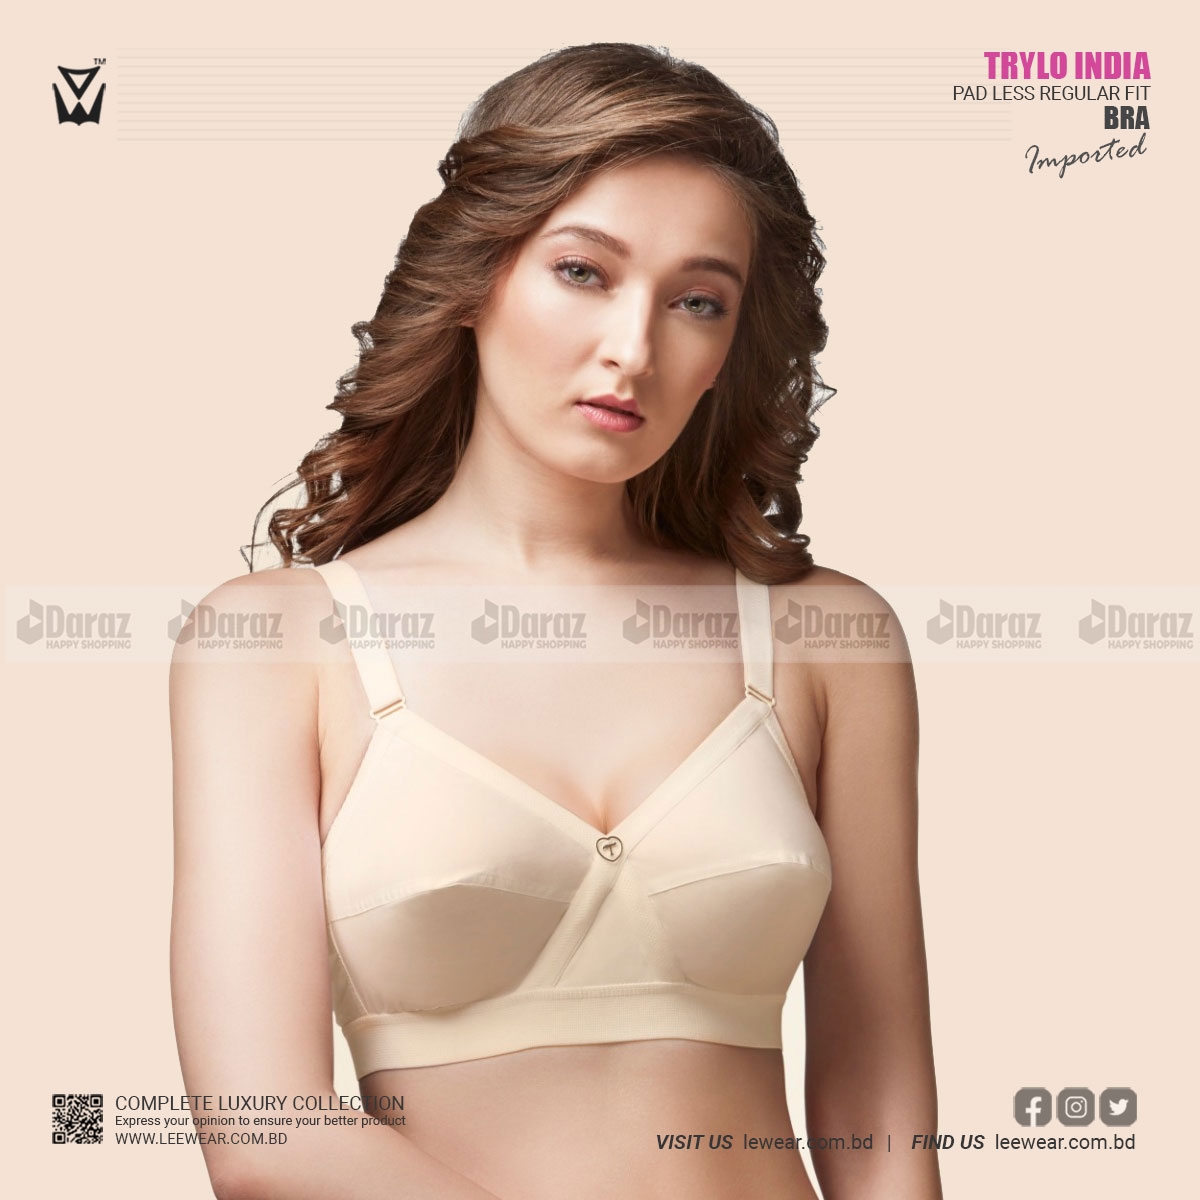 GORGEOUS LOOK BODY FIT TRYLO KRUTIKA IMPORTED INDIAN BRA LEEWEAR EXTRA  LARGE D CUP SIZE FULL SUPPORT BIG CUP SIZE BIG SIZE OVER SIZE TRYLO KRUTIKA  INDIAN BRA 04_03_00BR21107